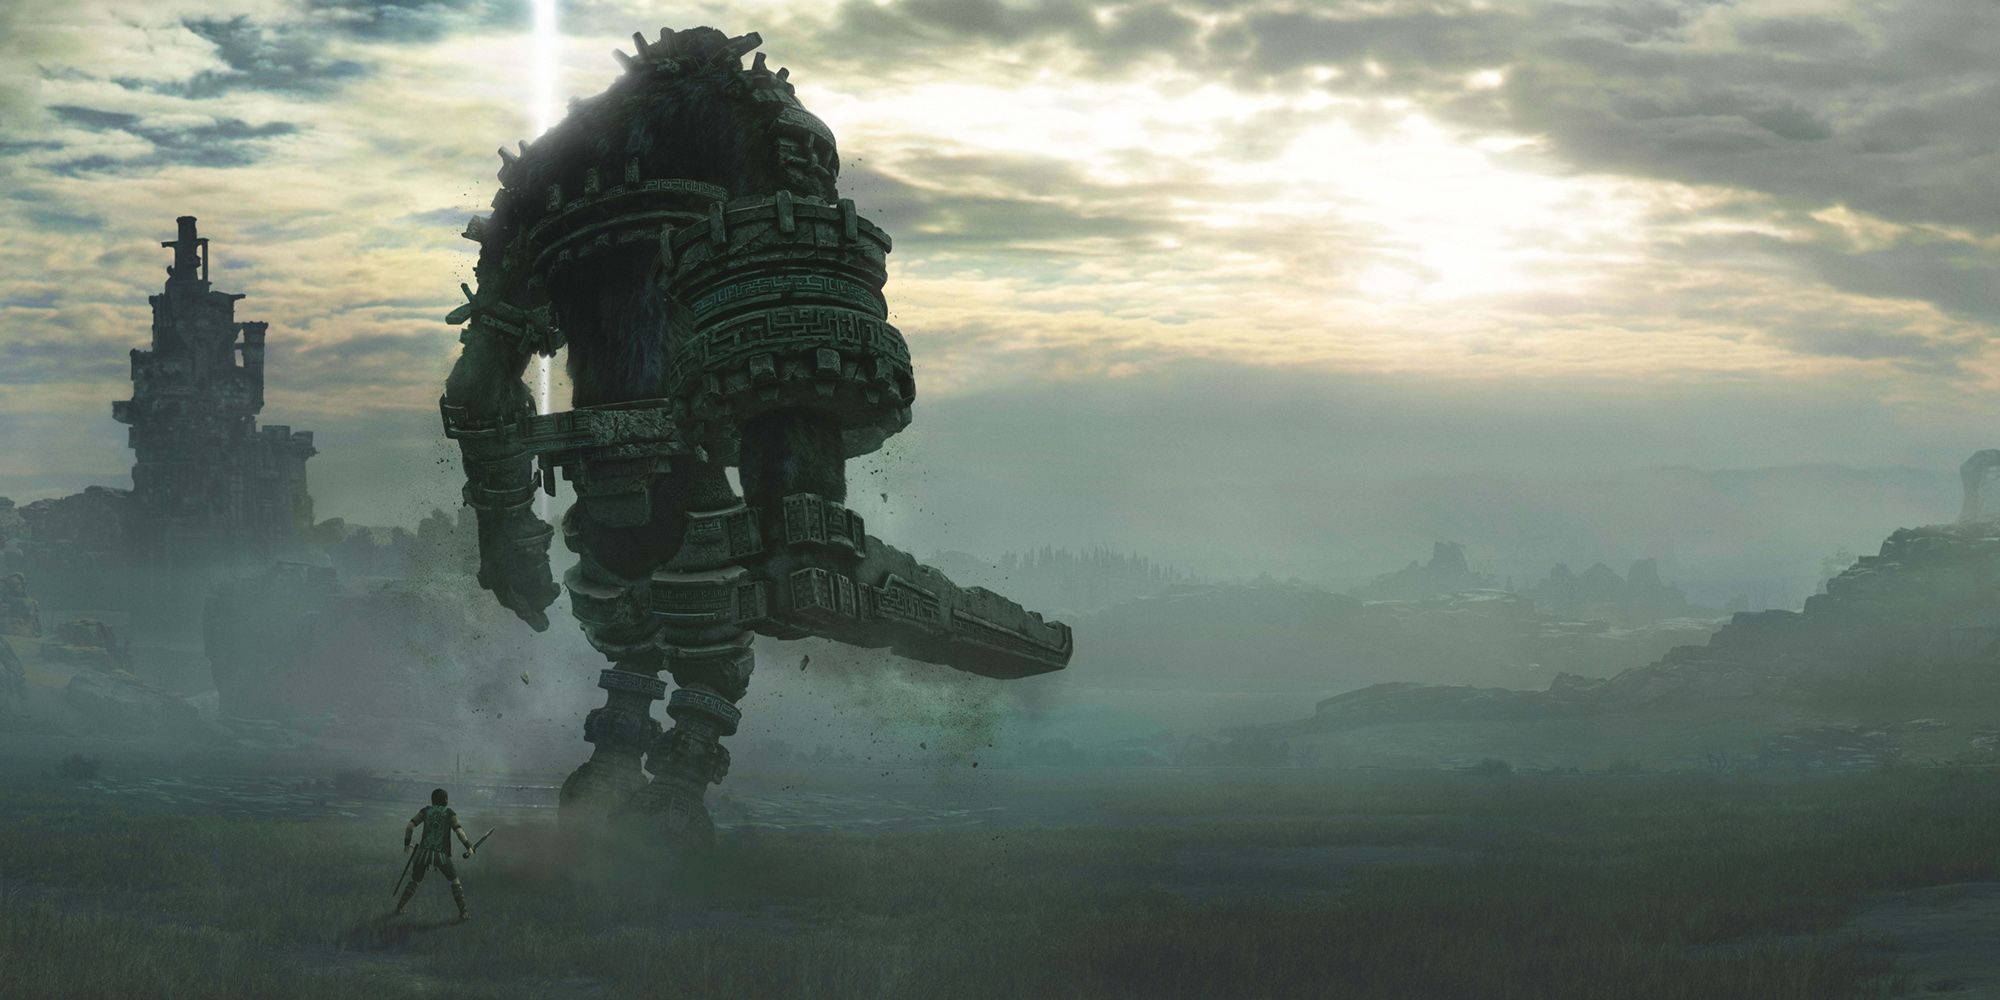 Wander Eyeing Up One Of The Colossi In The Remake Of Shadow Of The Colossus